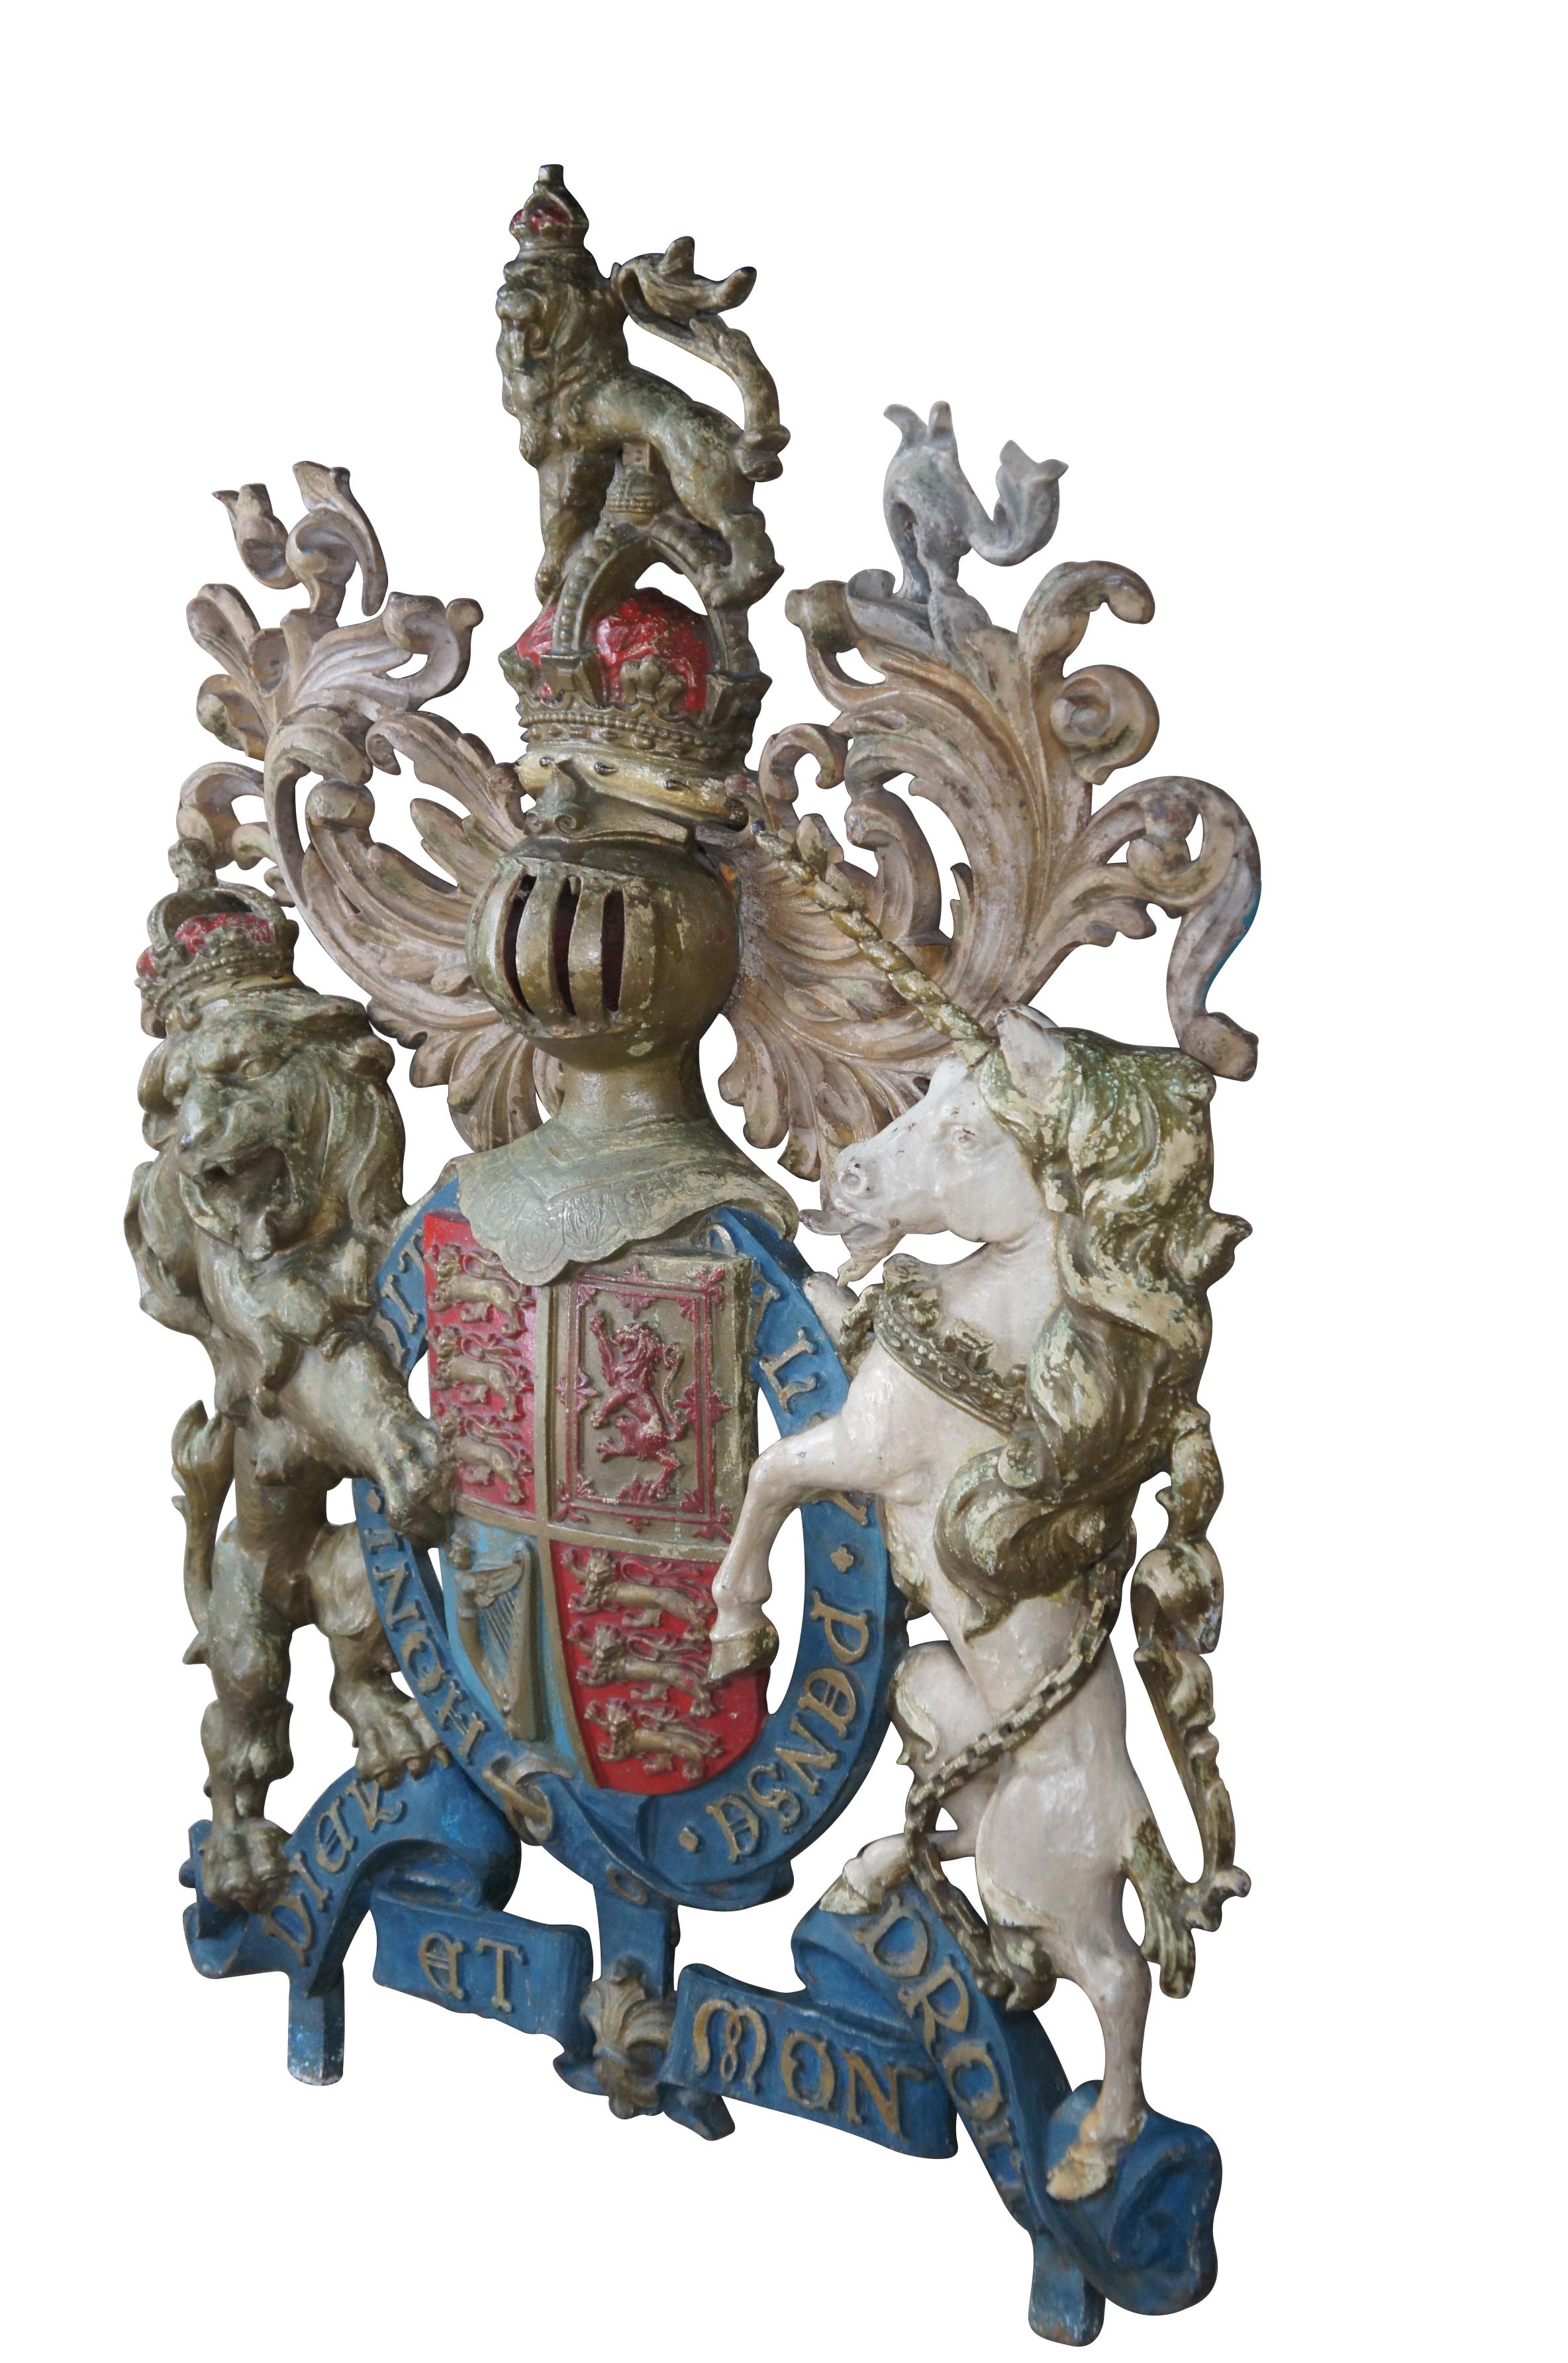 Very heavy and large Mid 19th Century English Cast Iron Royal Coat of Arms Shield or Crest.  Made from solid Cast Iron from the Walter MacFarlane & Co, Saracen Foundry Possil Park Glasgow.  This coat of arms was reclaimed from an English Great House